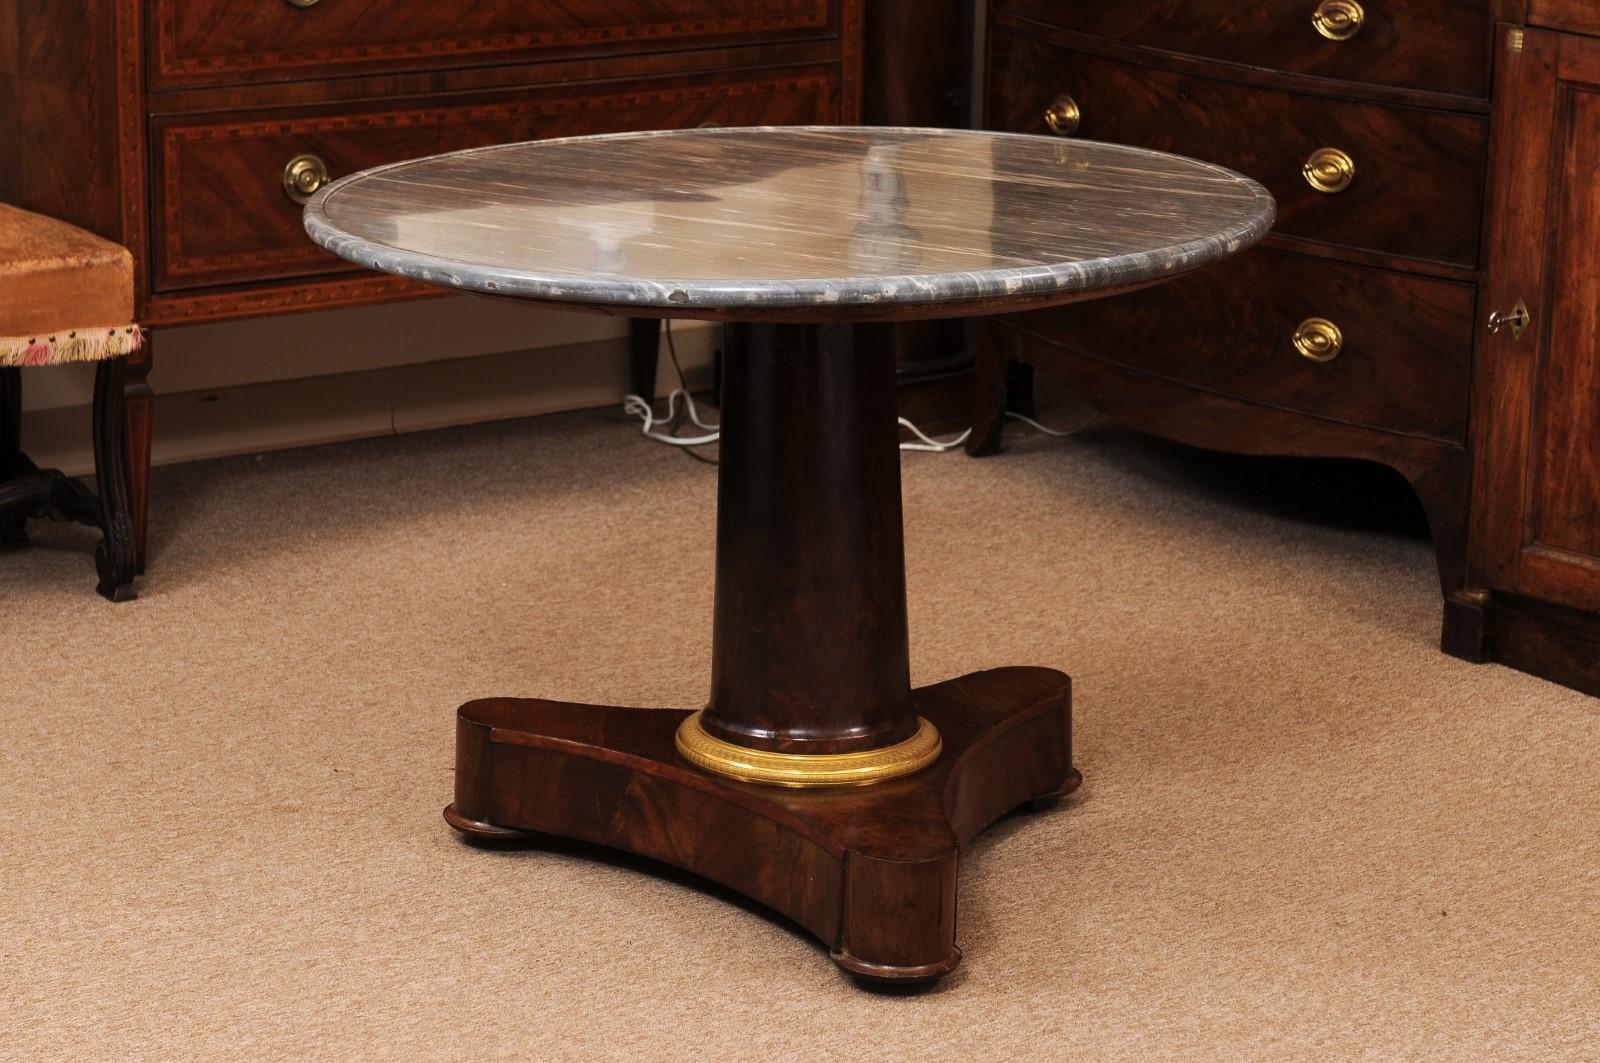  Early 19th C French Empire Walnut Center Table, Grey Marble Top & Ormolu Detail For Sale 1